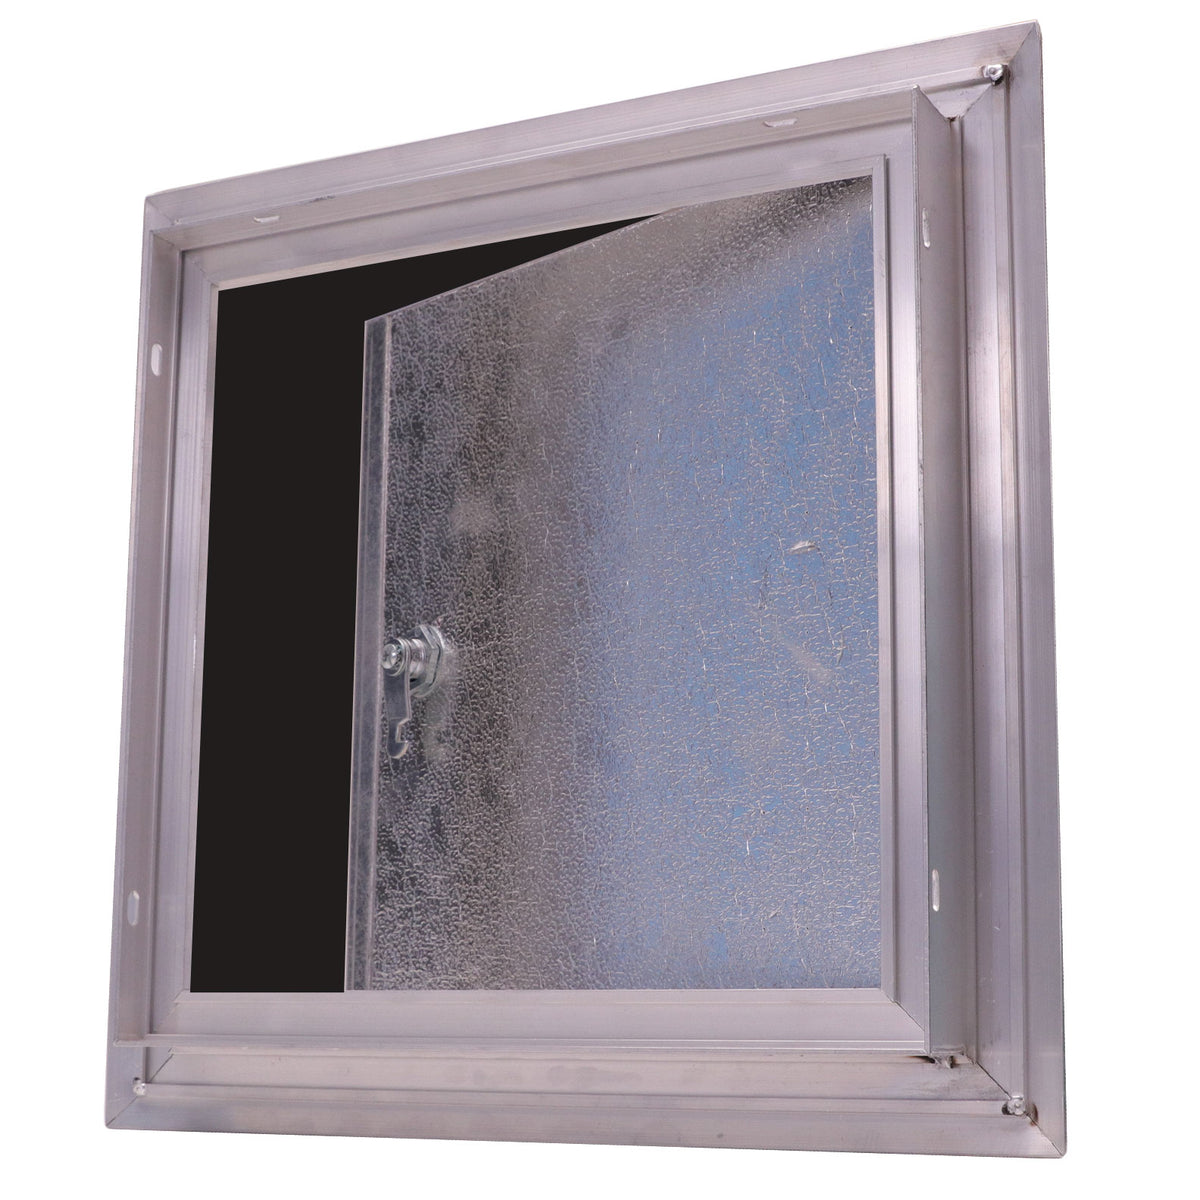 20&quot; X 20&quot; Aluminum Color Insulated Fire Rated Access Panel Door For Wall / Ceiling Application (Lock and Key) With Frame - [Outer Dimensions: 21&quot; Width X 21&quot; Height]